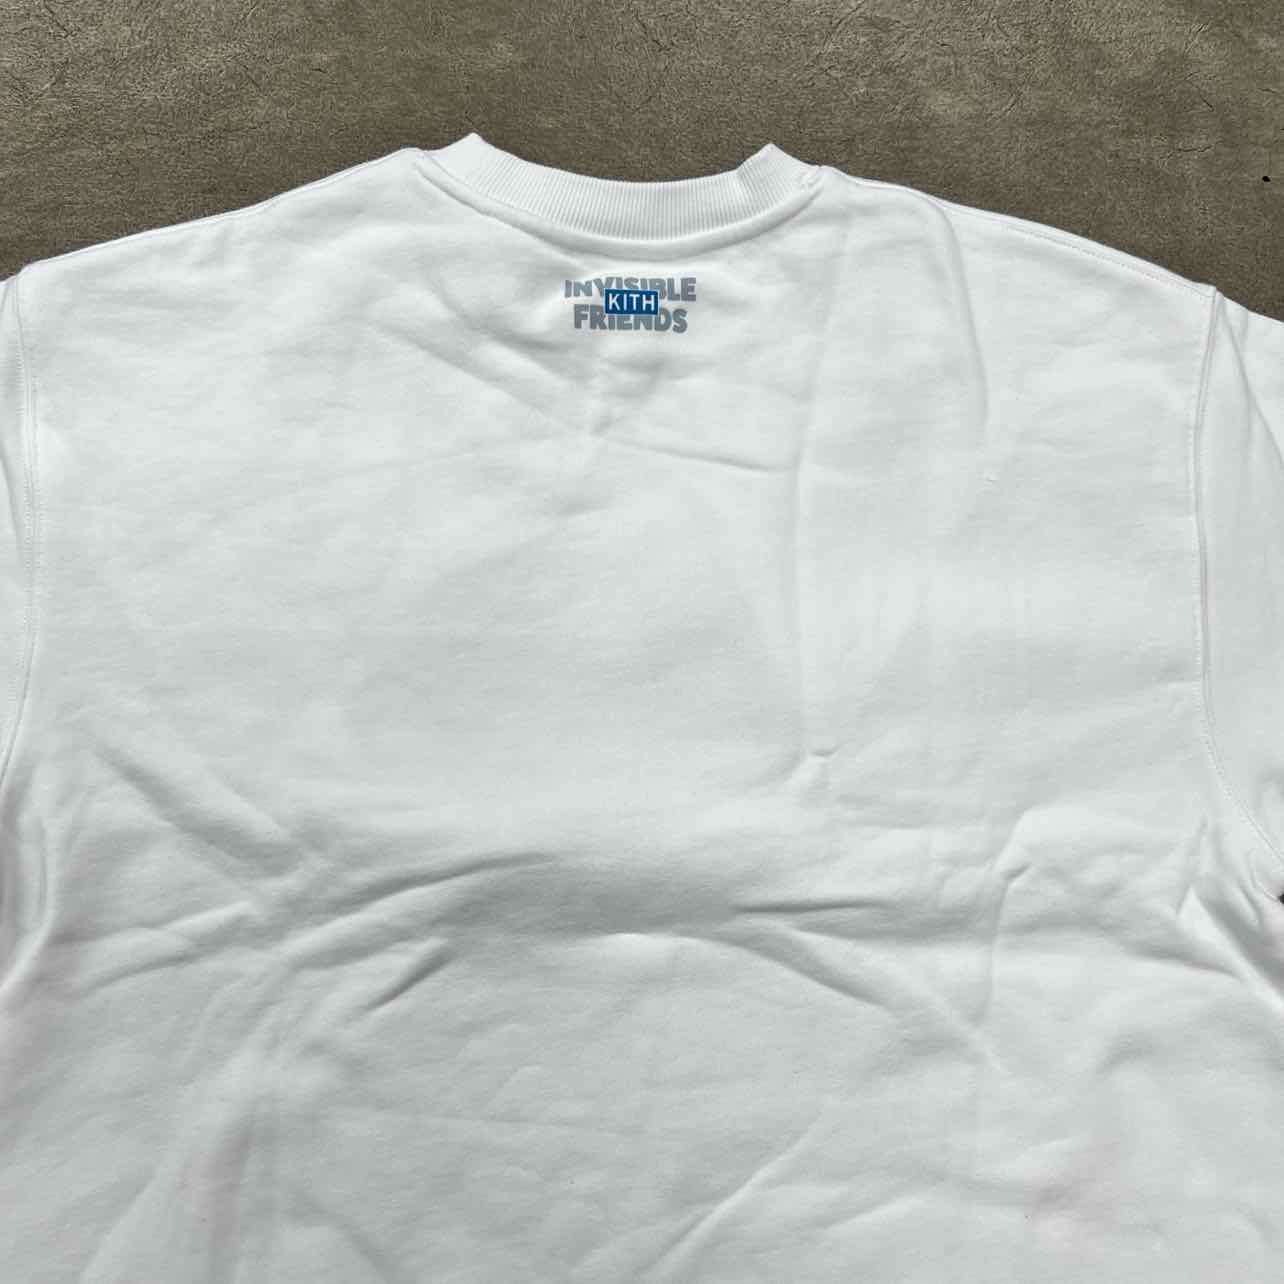 Kith Crewneck Sweater "INVISIBLE FRIENDS" White New Size M